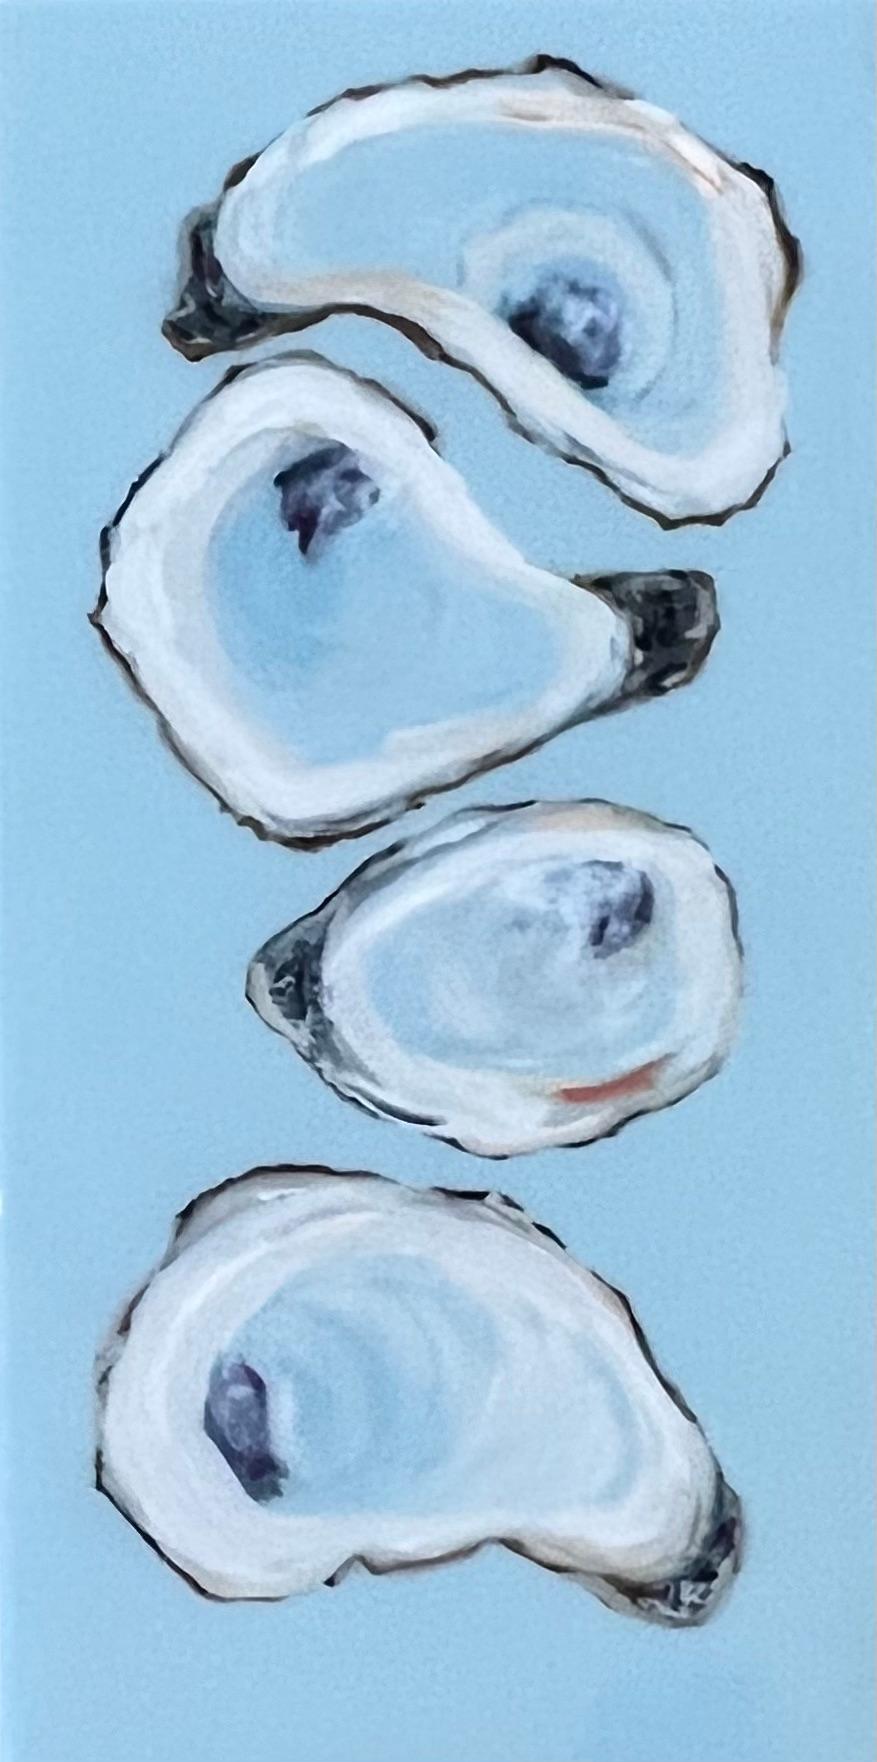 Anne Harney Figurative Painting - "Oysters VI" 4 blue and black oysters on a sky blue background with resin finish